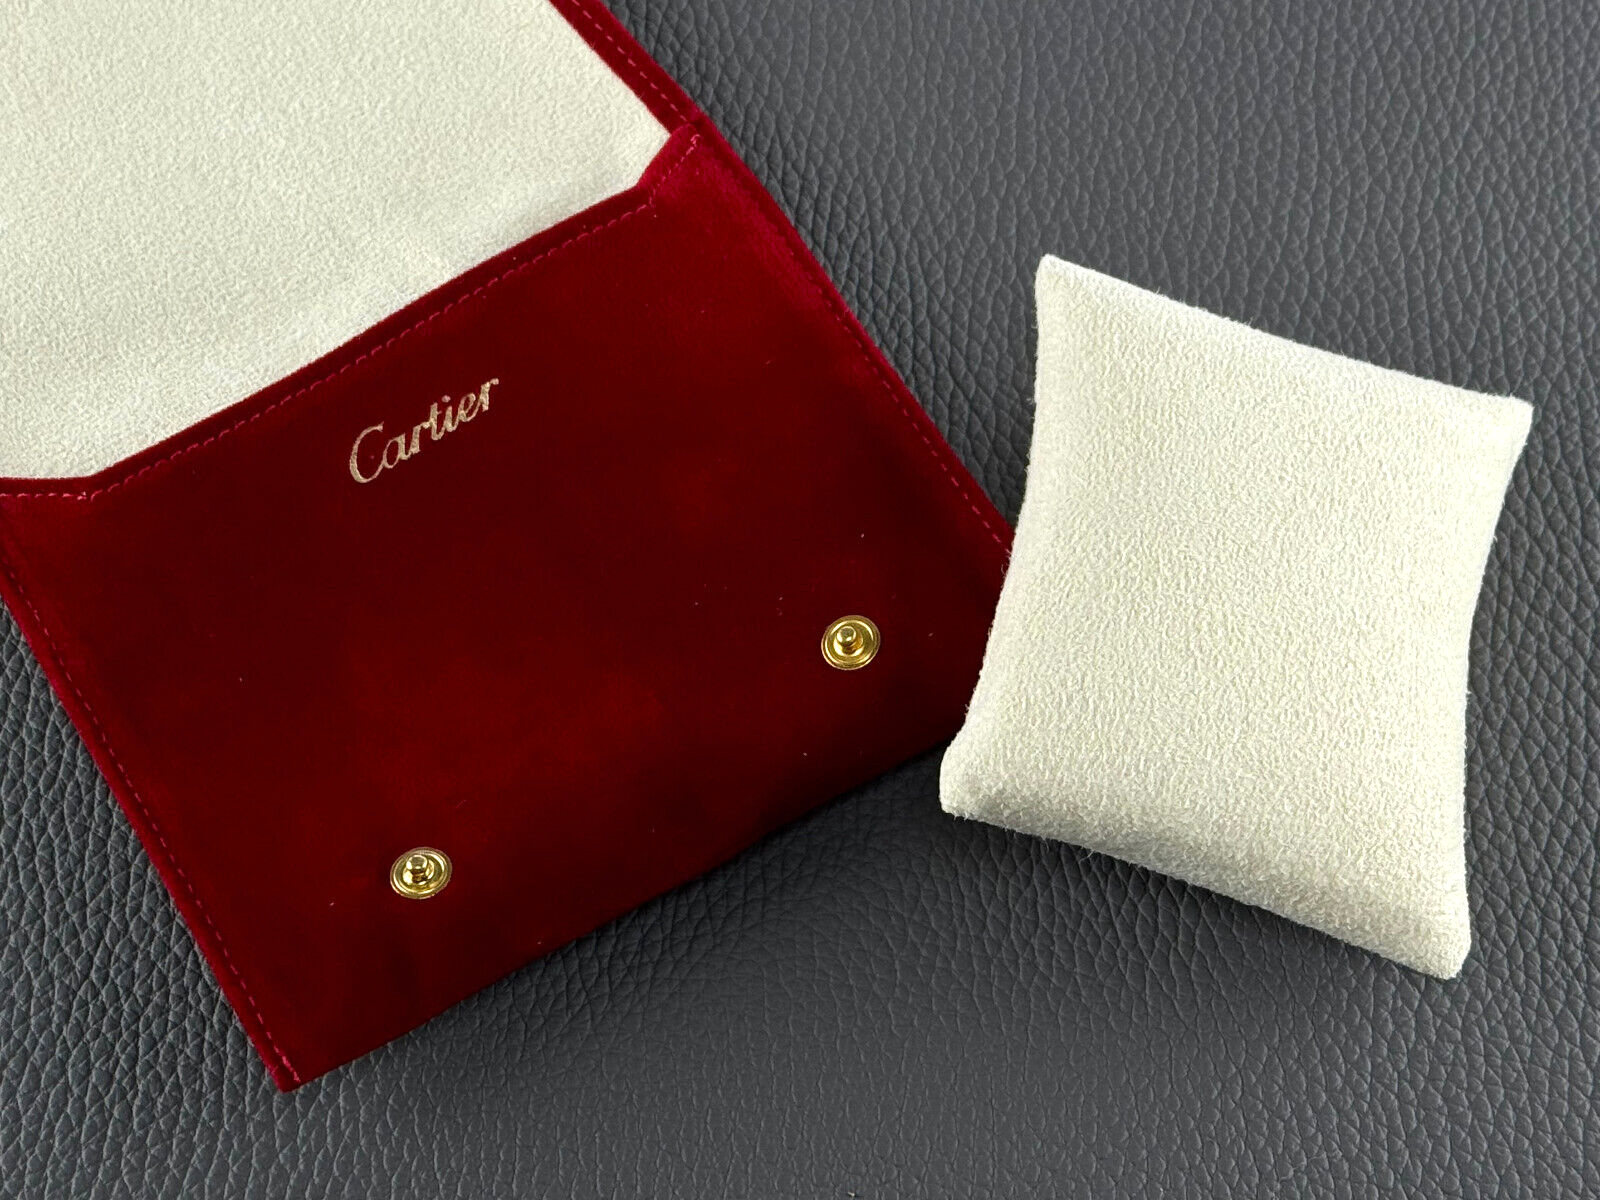 Cartier fabric watch case red